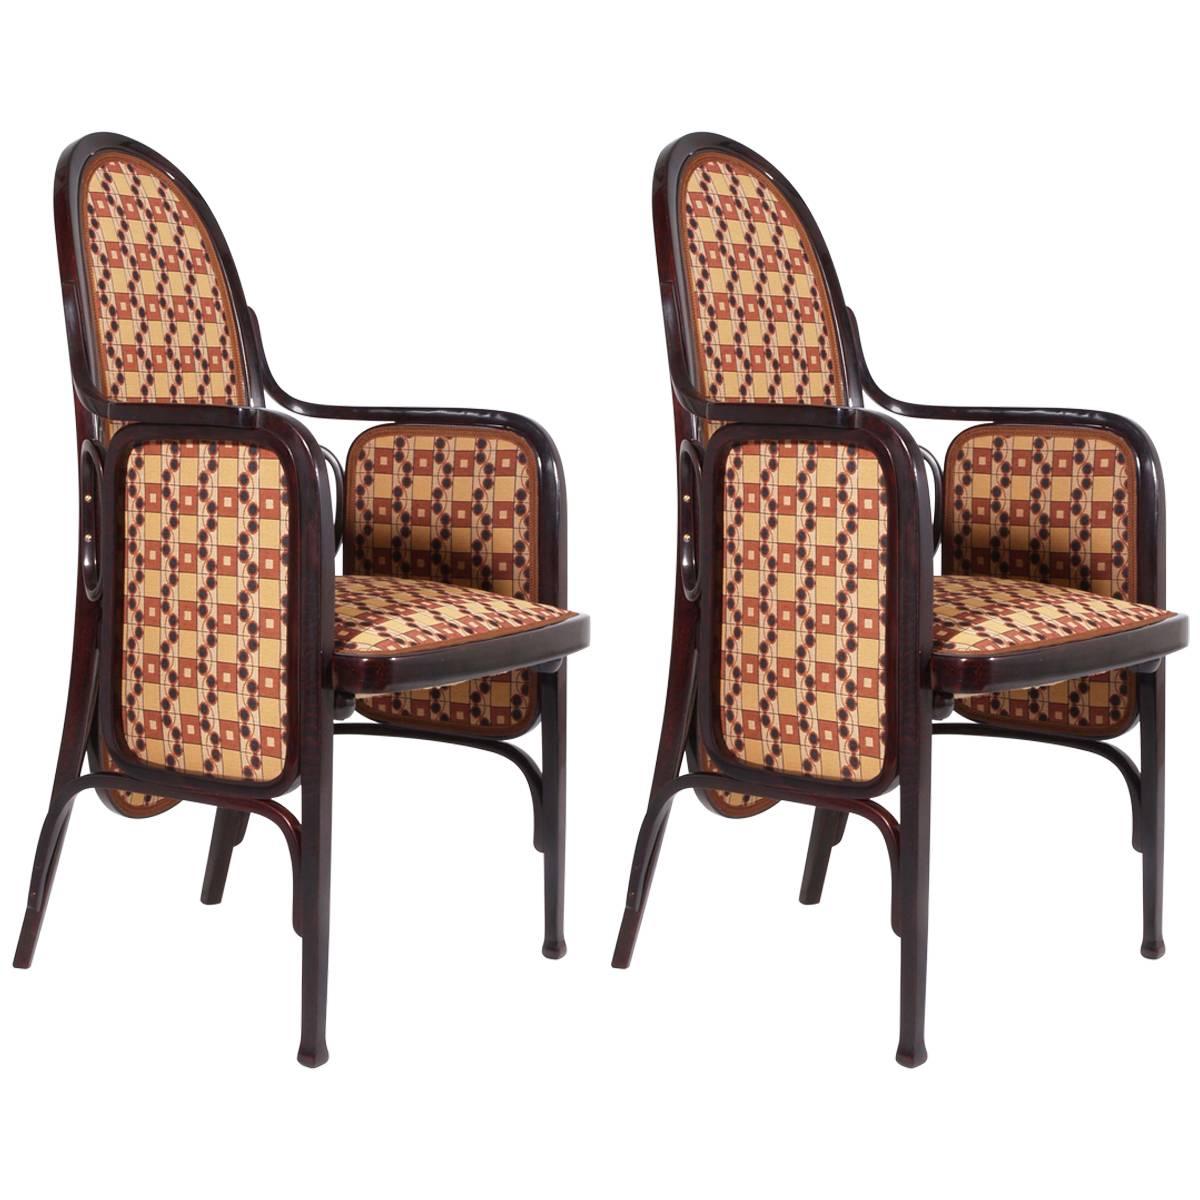 Two Bentwood Armchairs by Thonet, Vienna, 1900